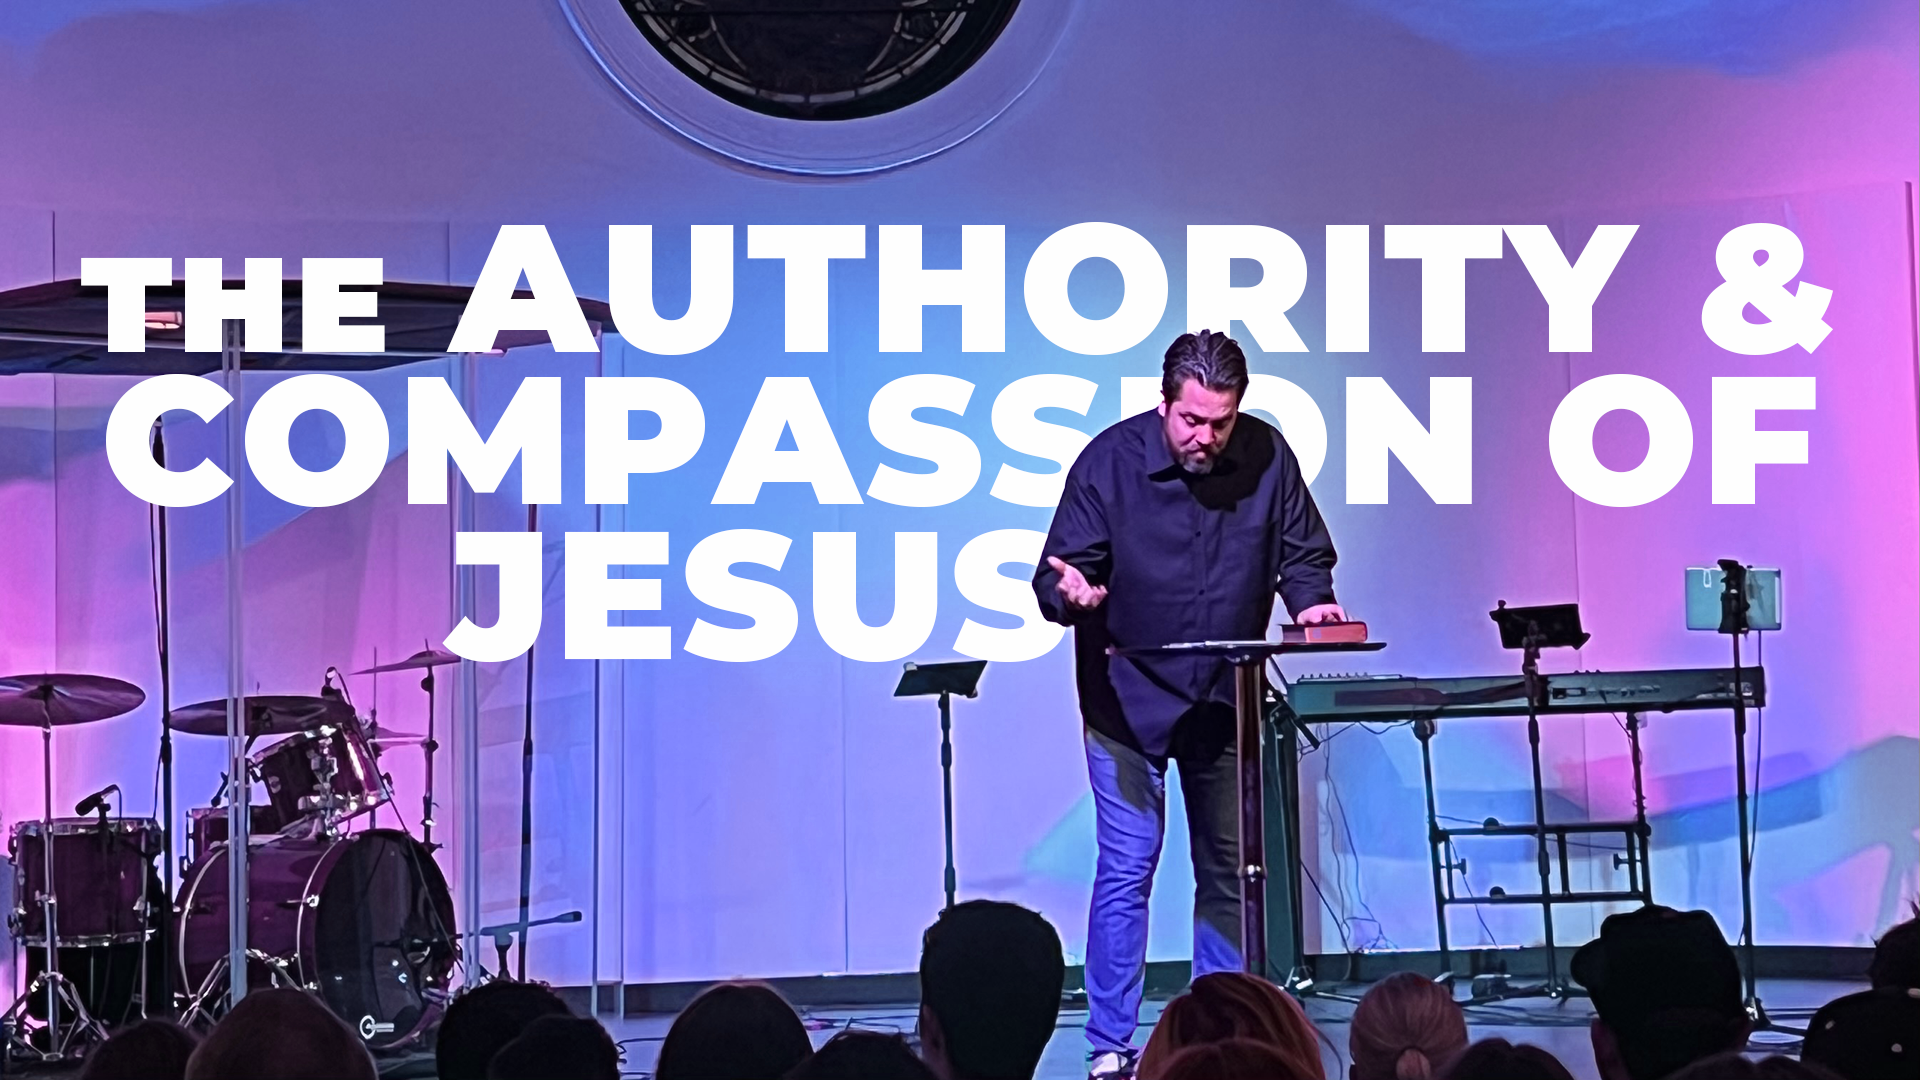 The Authority and Compassion of Jesus